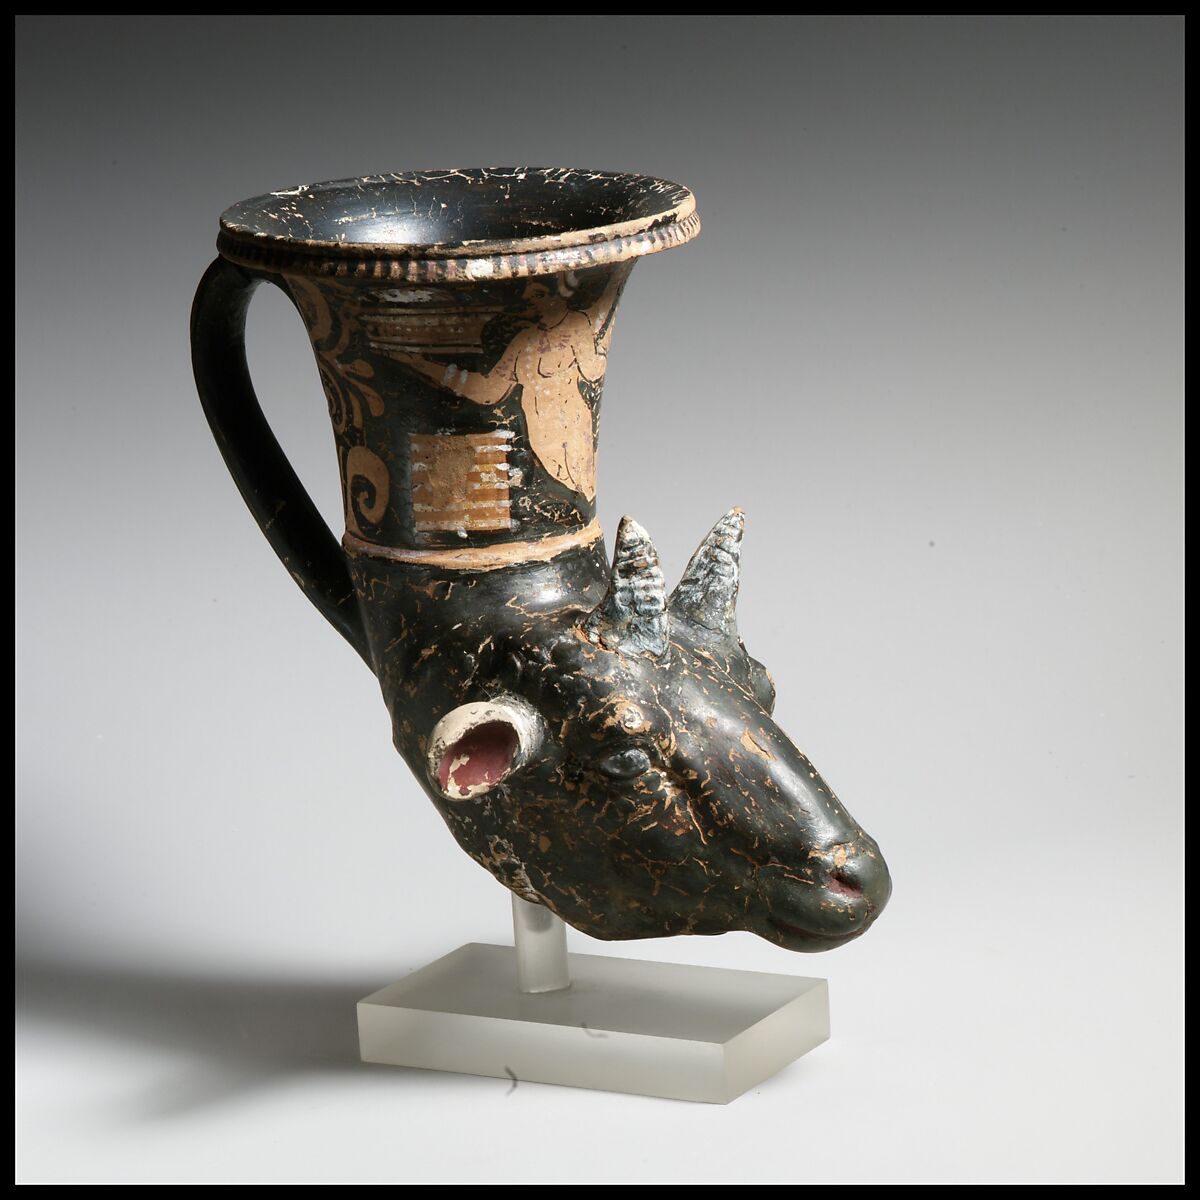 Terracotta rhyton (vase for libations or drinking), Attributed to the Patera-Ganymede Workshop, Terracotta, Greek, South Italian, Apulian 